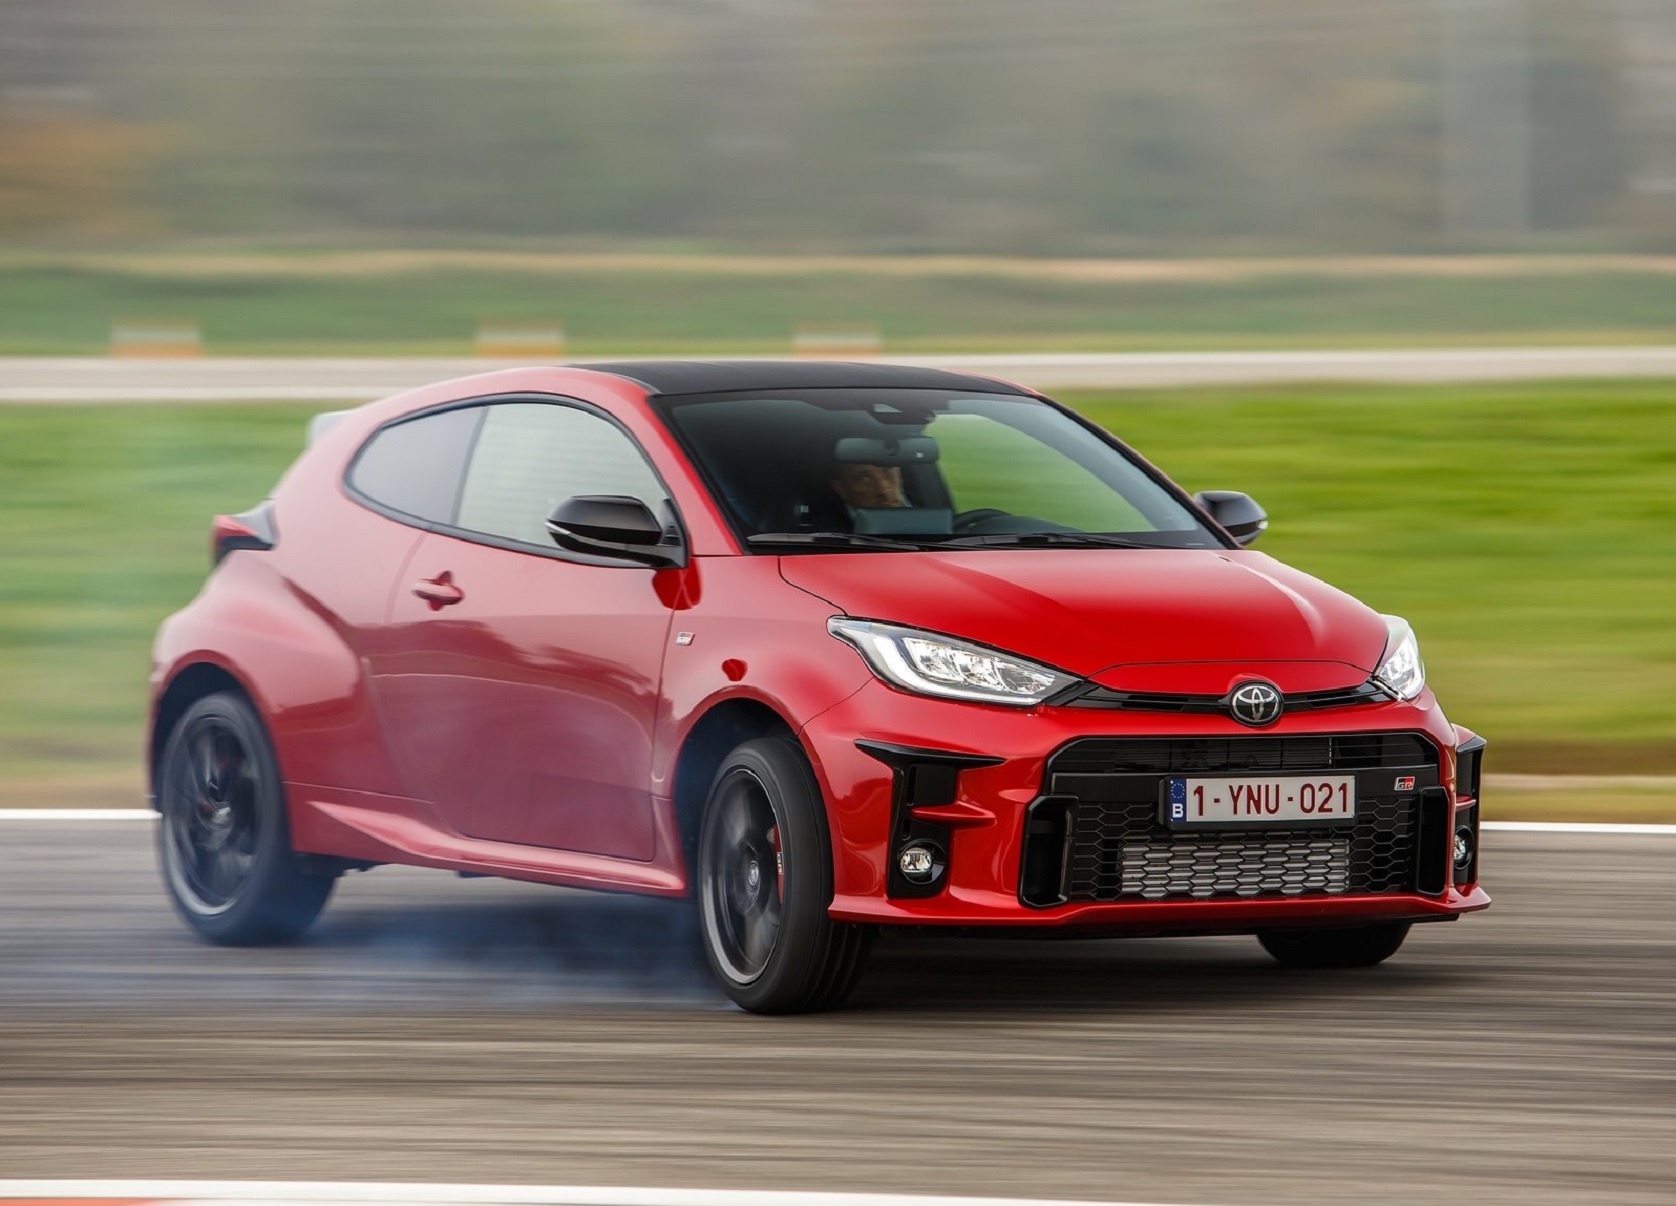 A red 2021 Toyota GR Yaris slides on a track